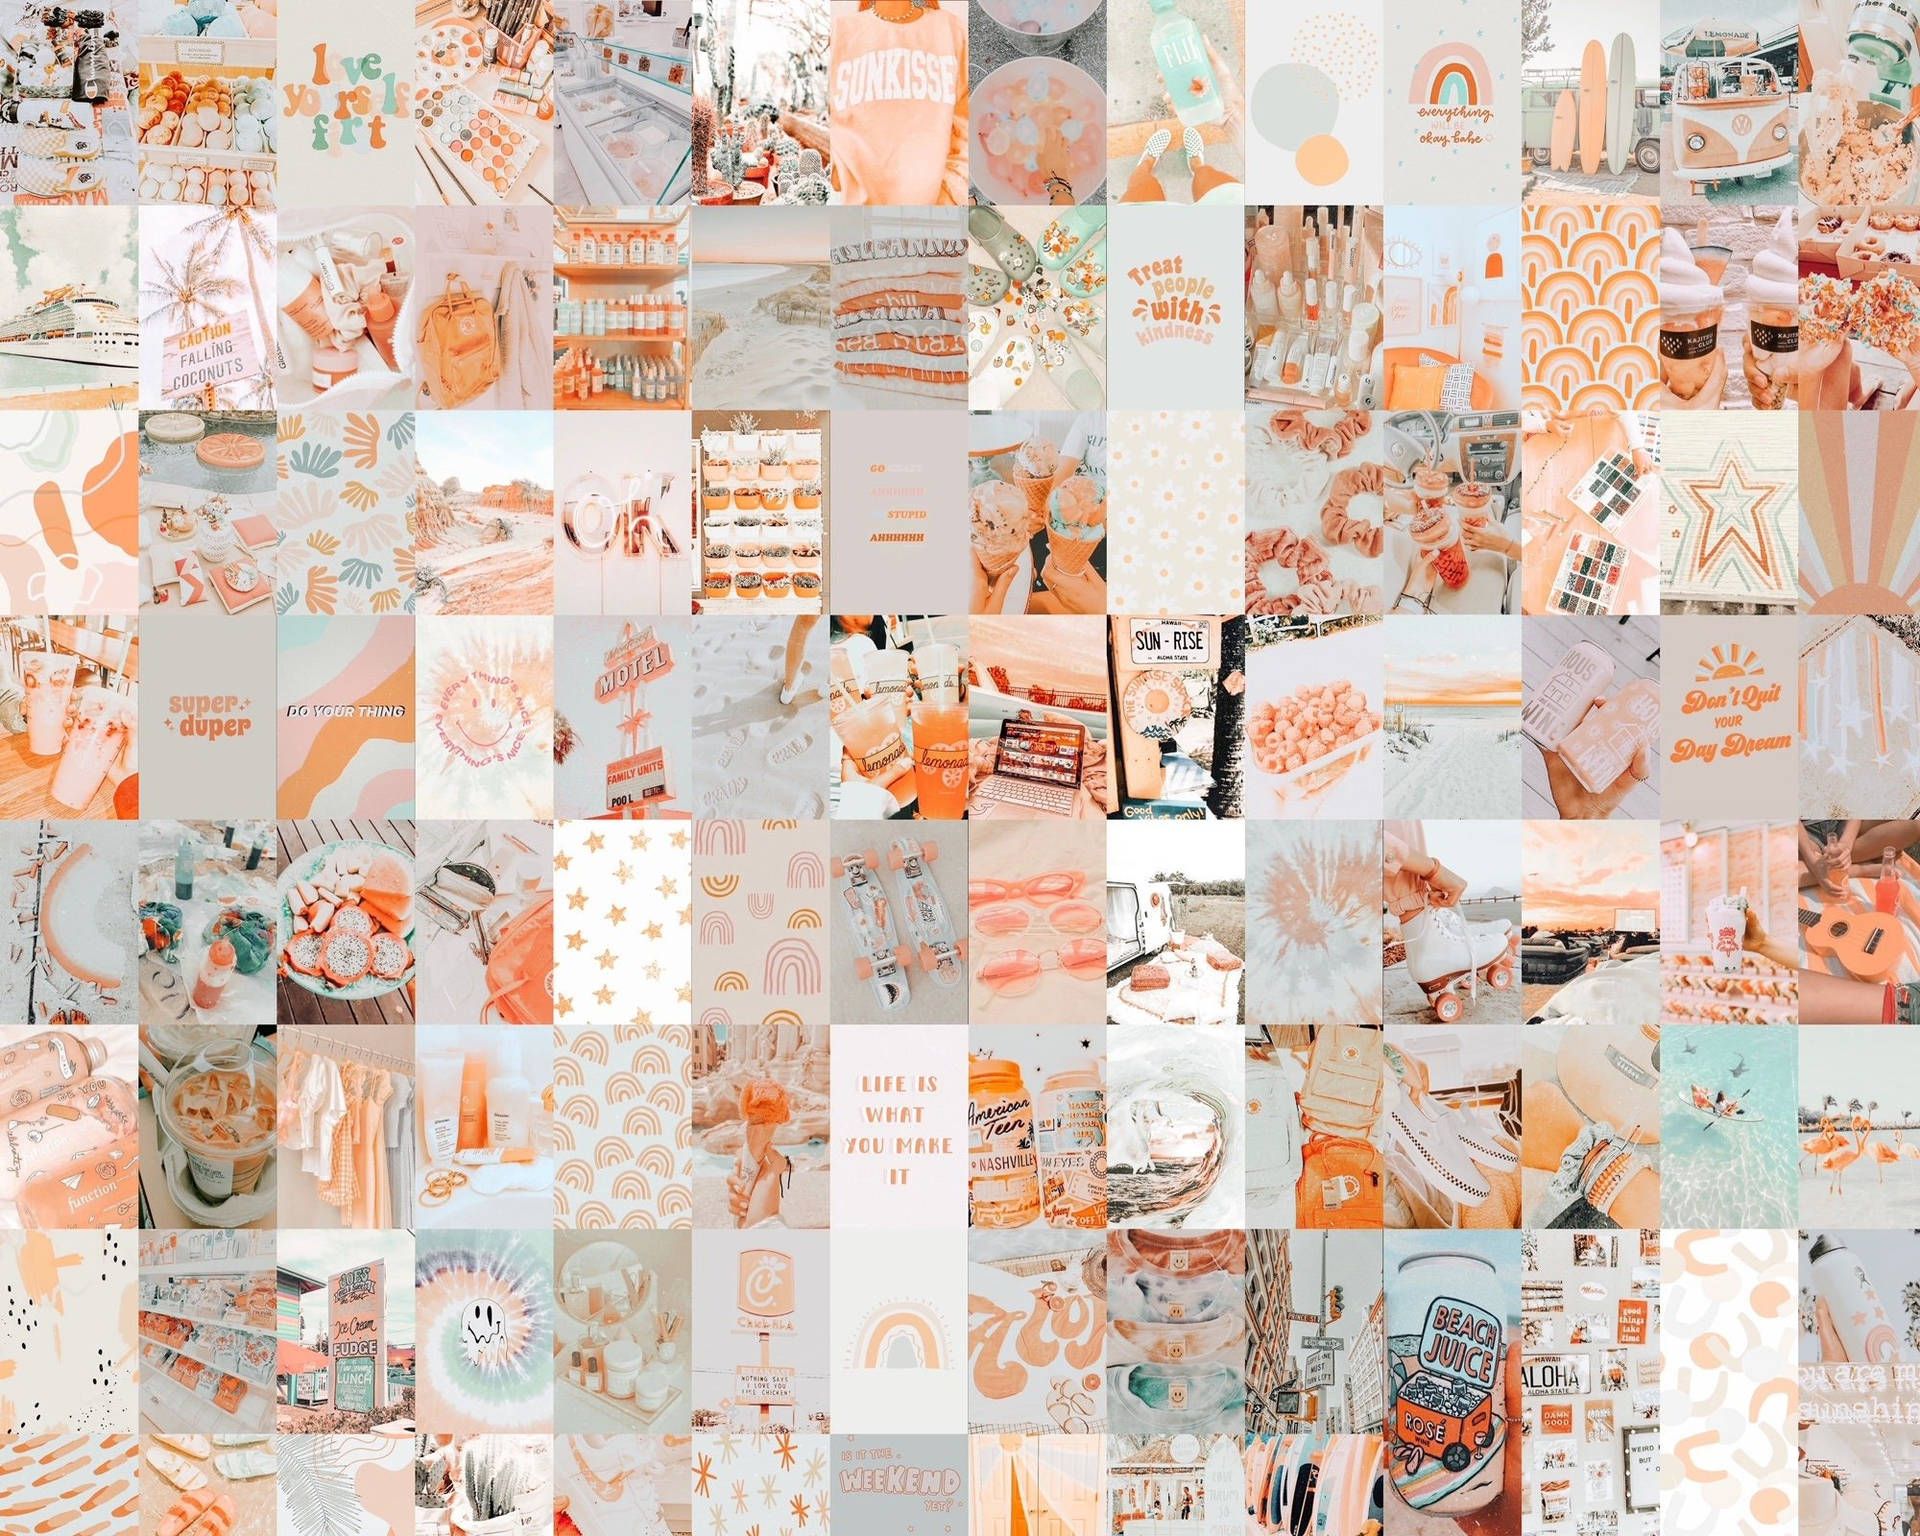 A collage of 60 photos in a white, orange and blue aesthetic. - Peach